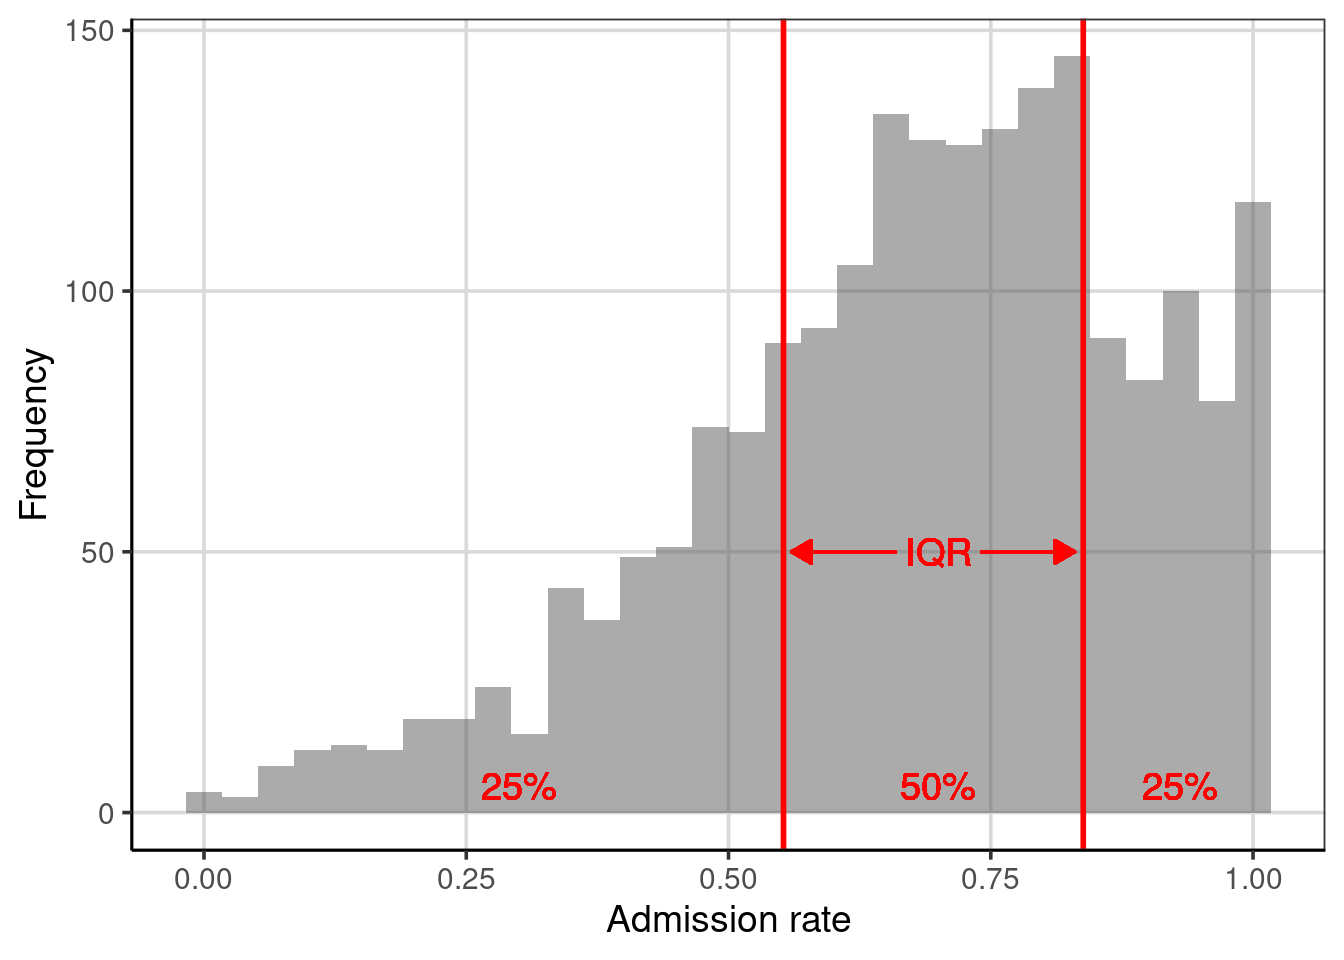 Distribution of the admission rates for 2,019 institutions of higher education. The solid, red lines are placed at the 25th and 75th percentiles, respectively.